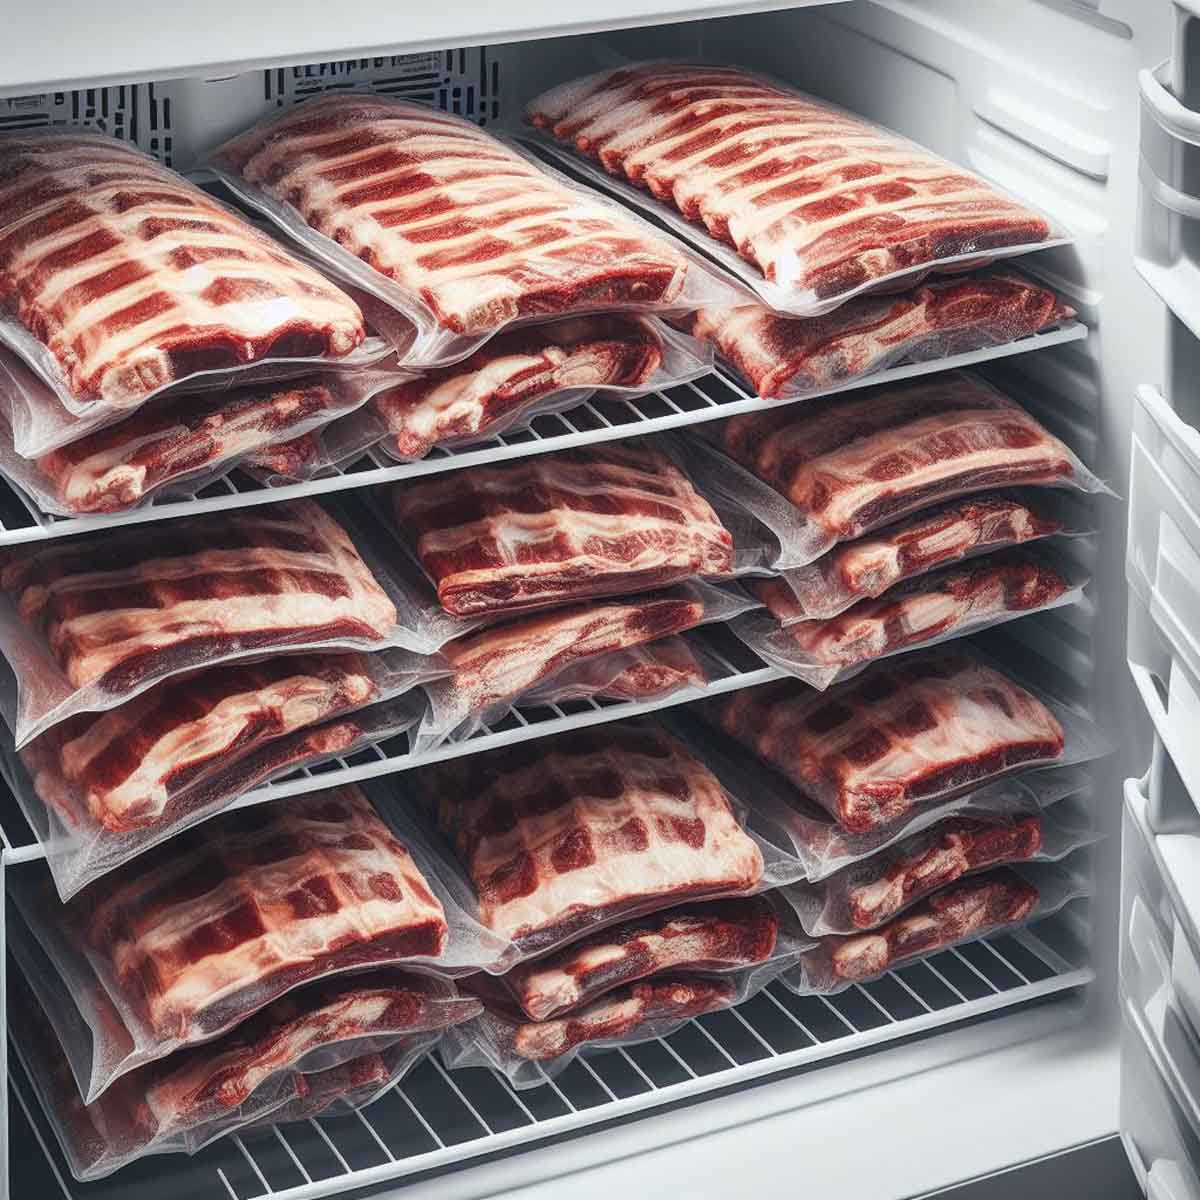 Frozen ribs neatly stored in a frost-free freezer, showcasing efficient food storage practices.